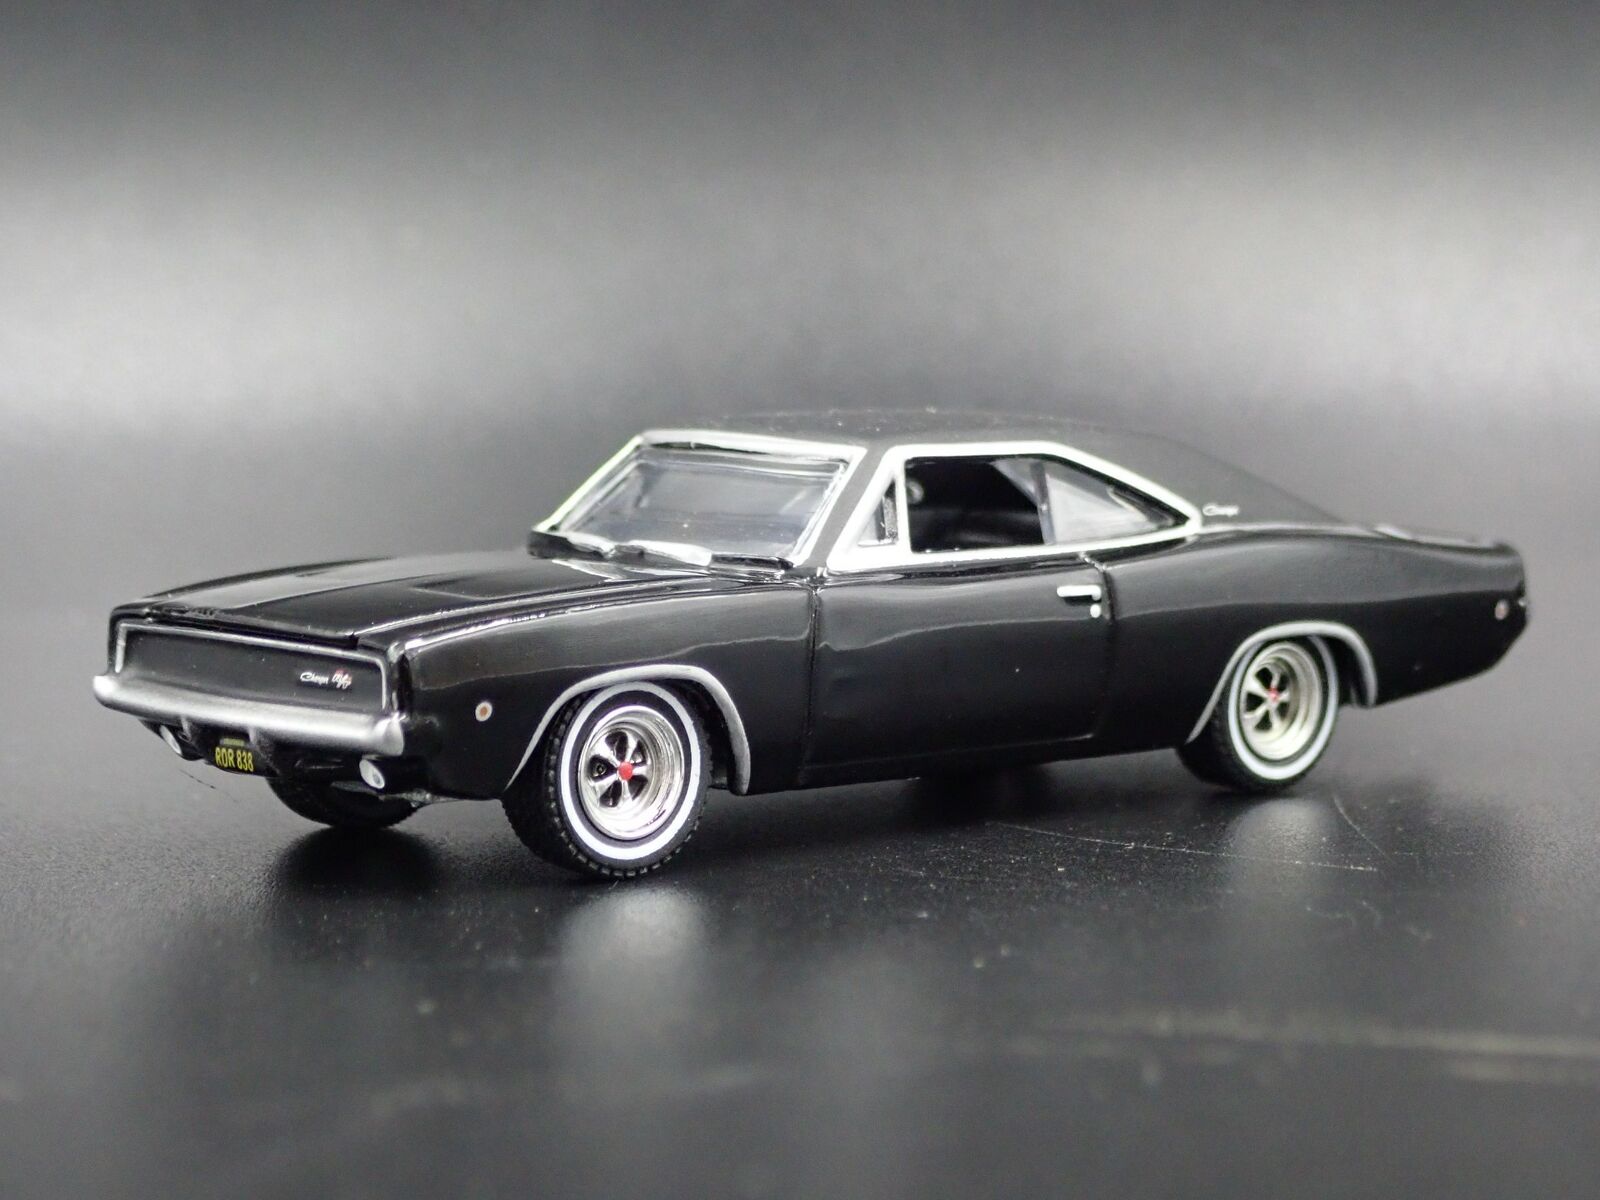 1968 68 DODGE CHARGER R/T RARE 1:64 SCALE COLLECTIBLE DIORAMA DIECAST MODEL CAR